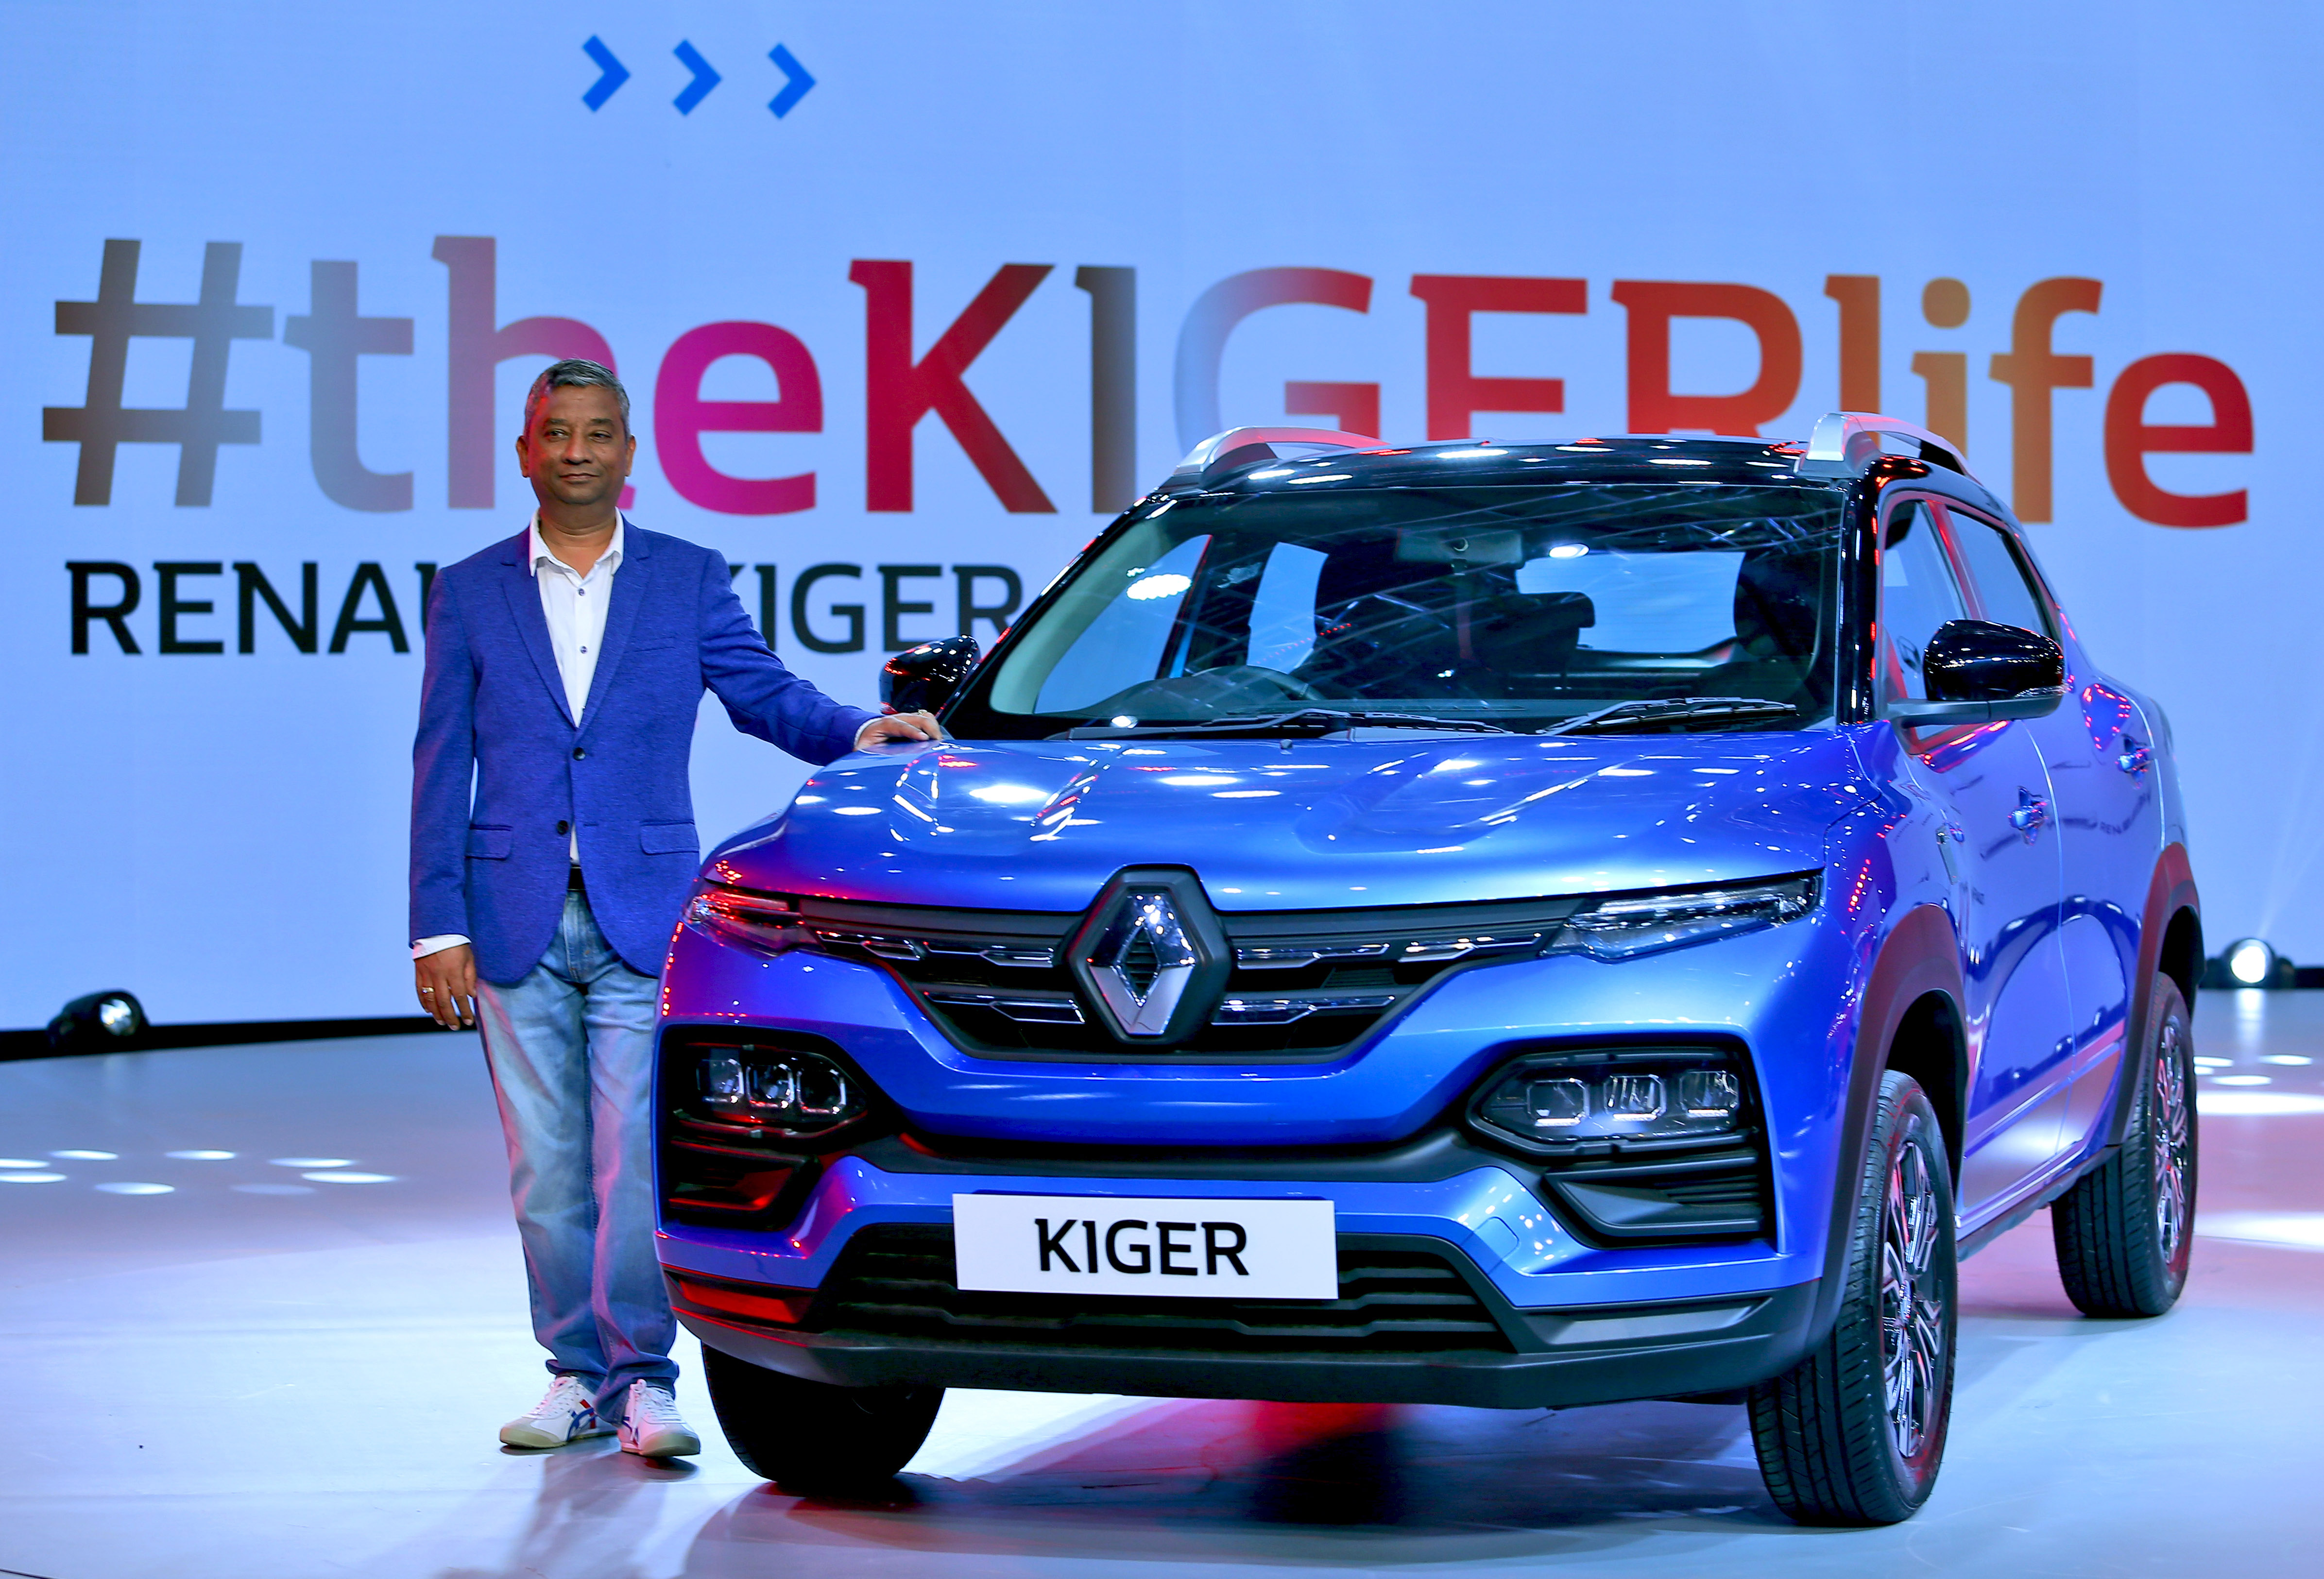 world-first-the-sporty-smart-stunning-renault-kiger-makes-its-debut-in-india